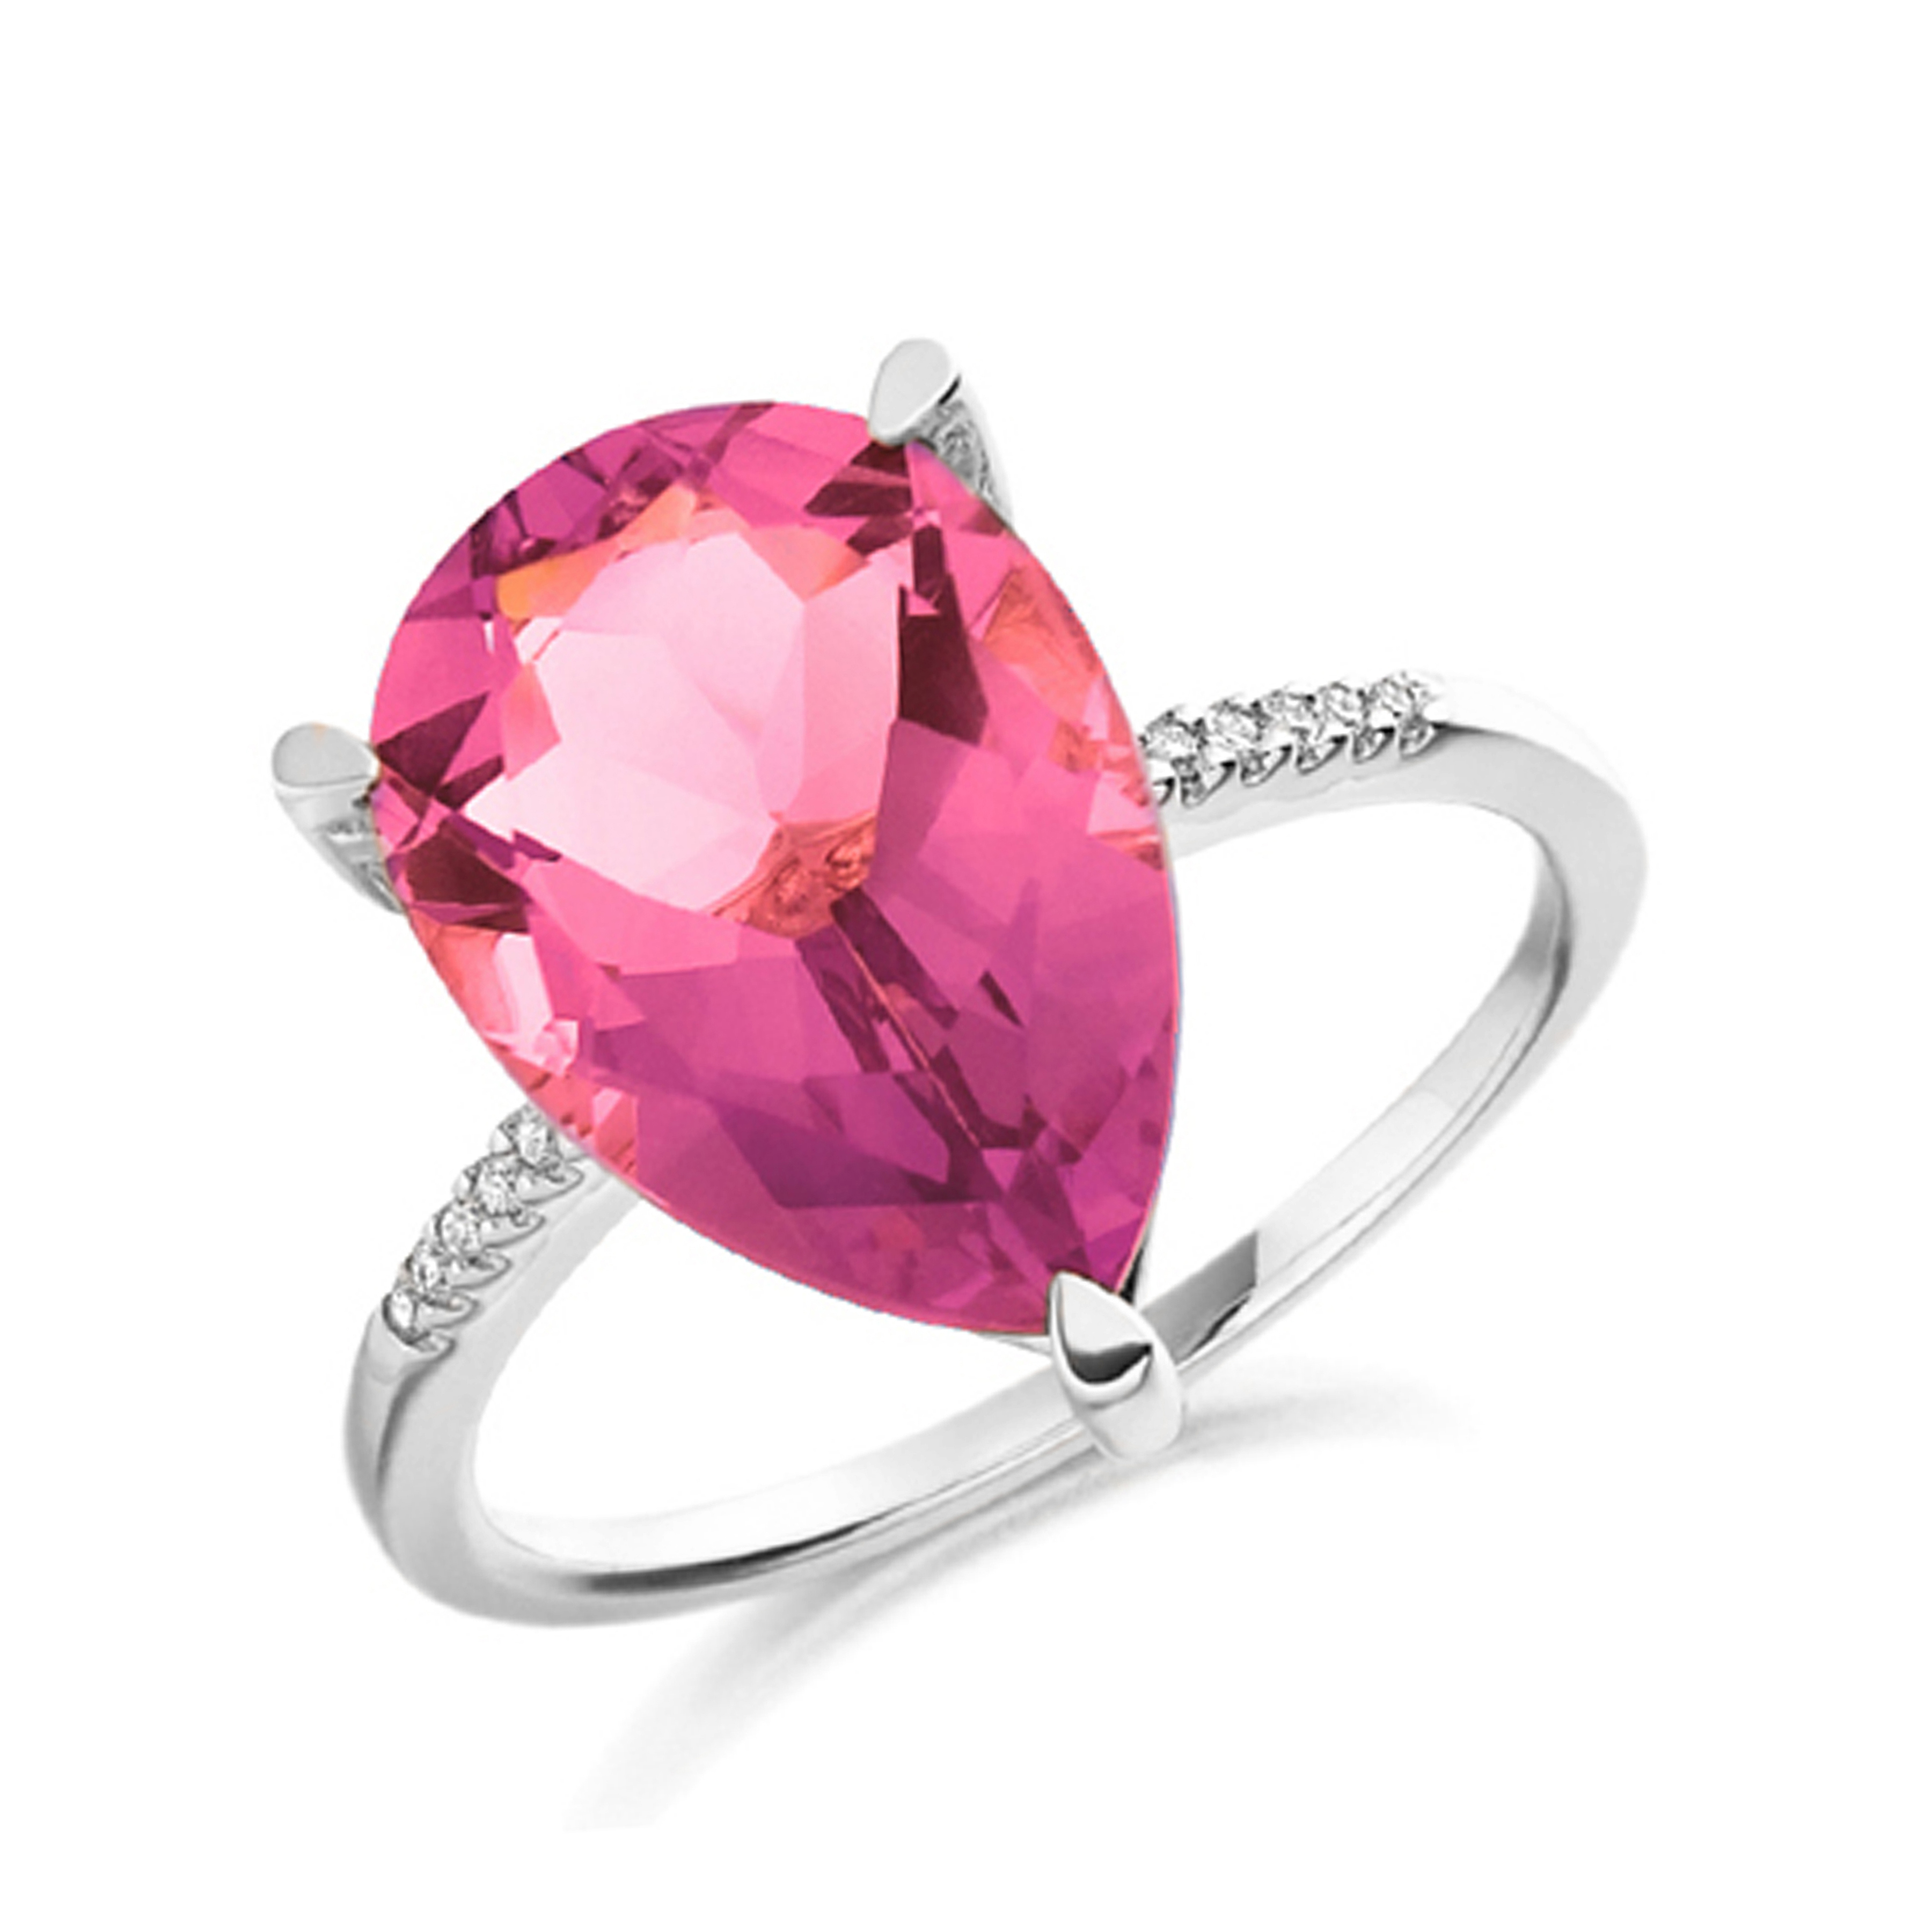 14X10mm Pear Pink Topaz Stones On Shoulder Diamond And Gemstone Engagement Ring